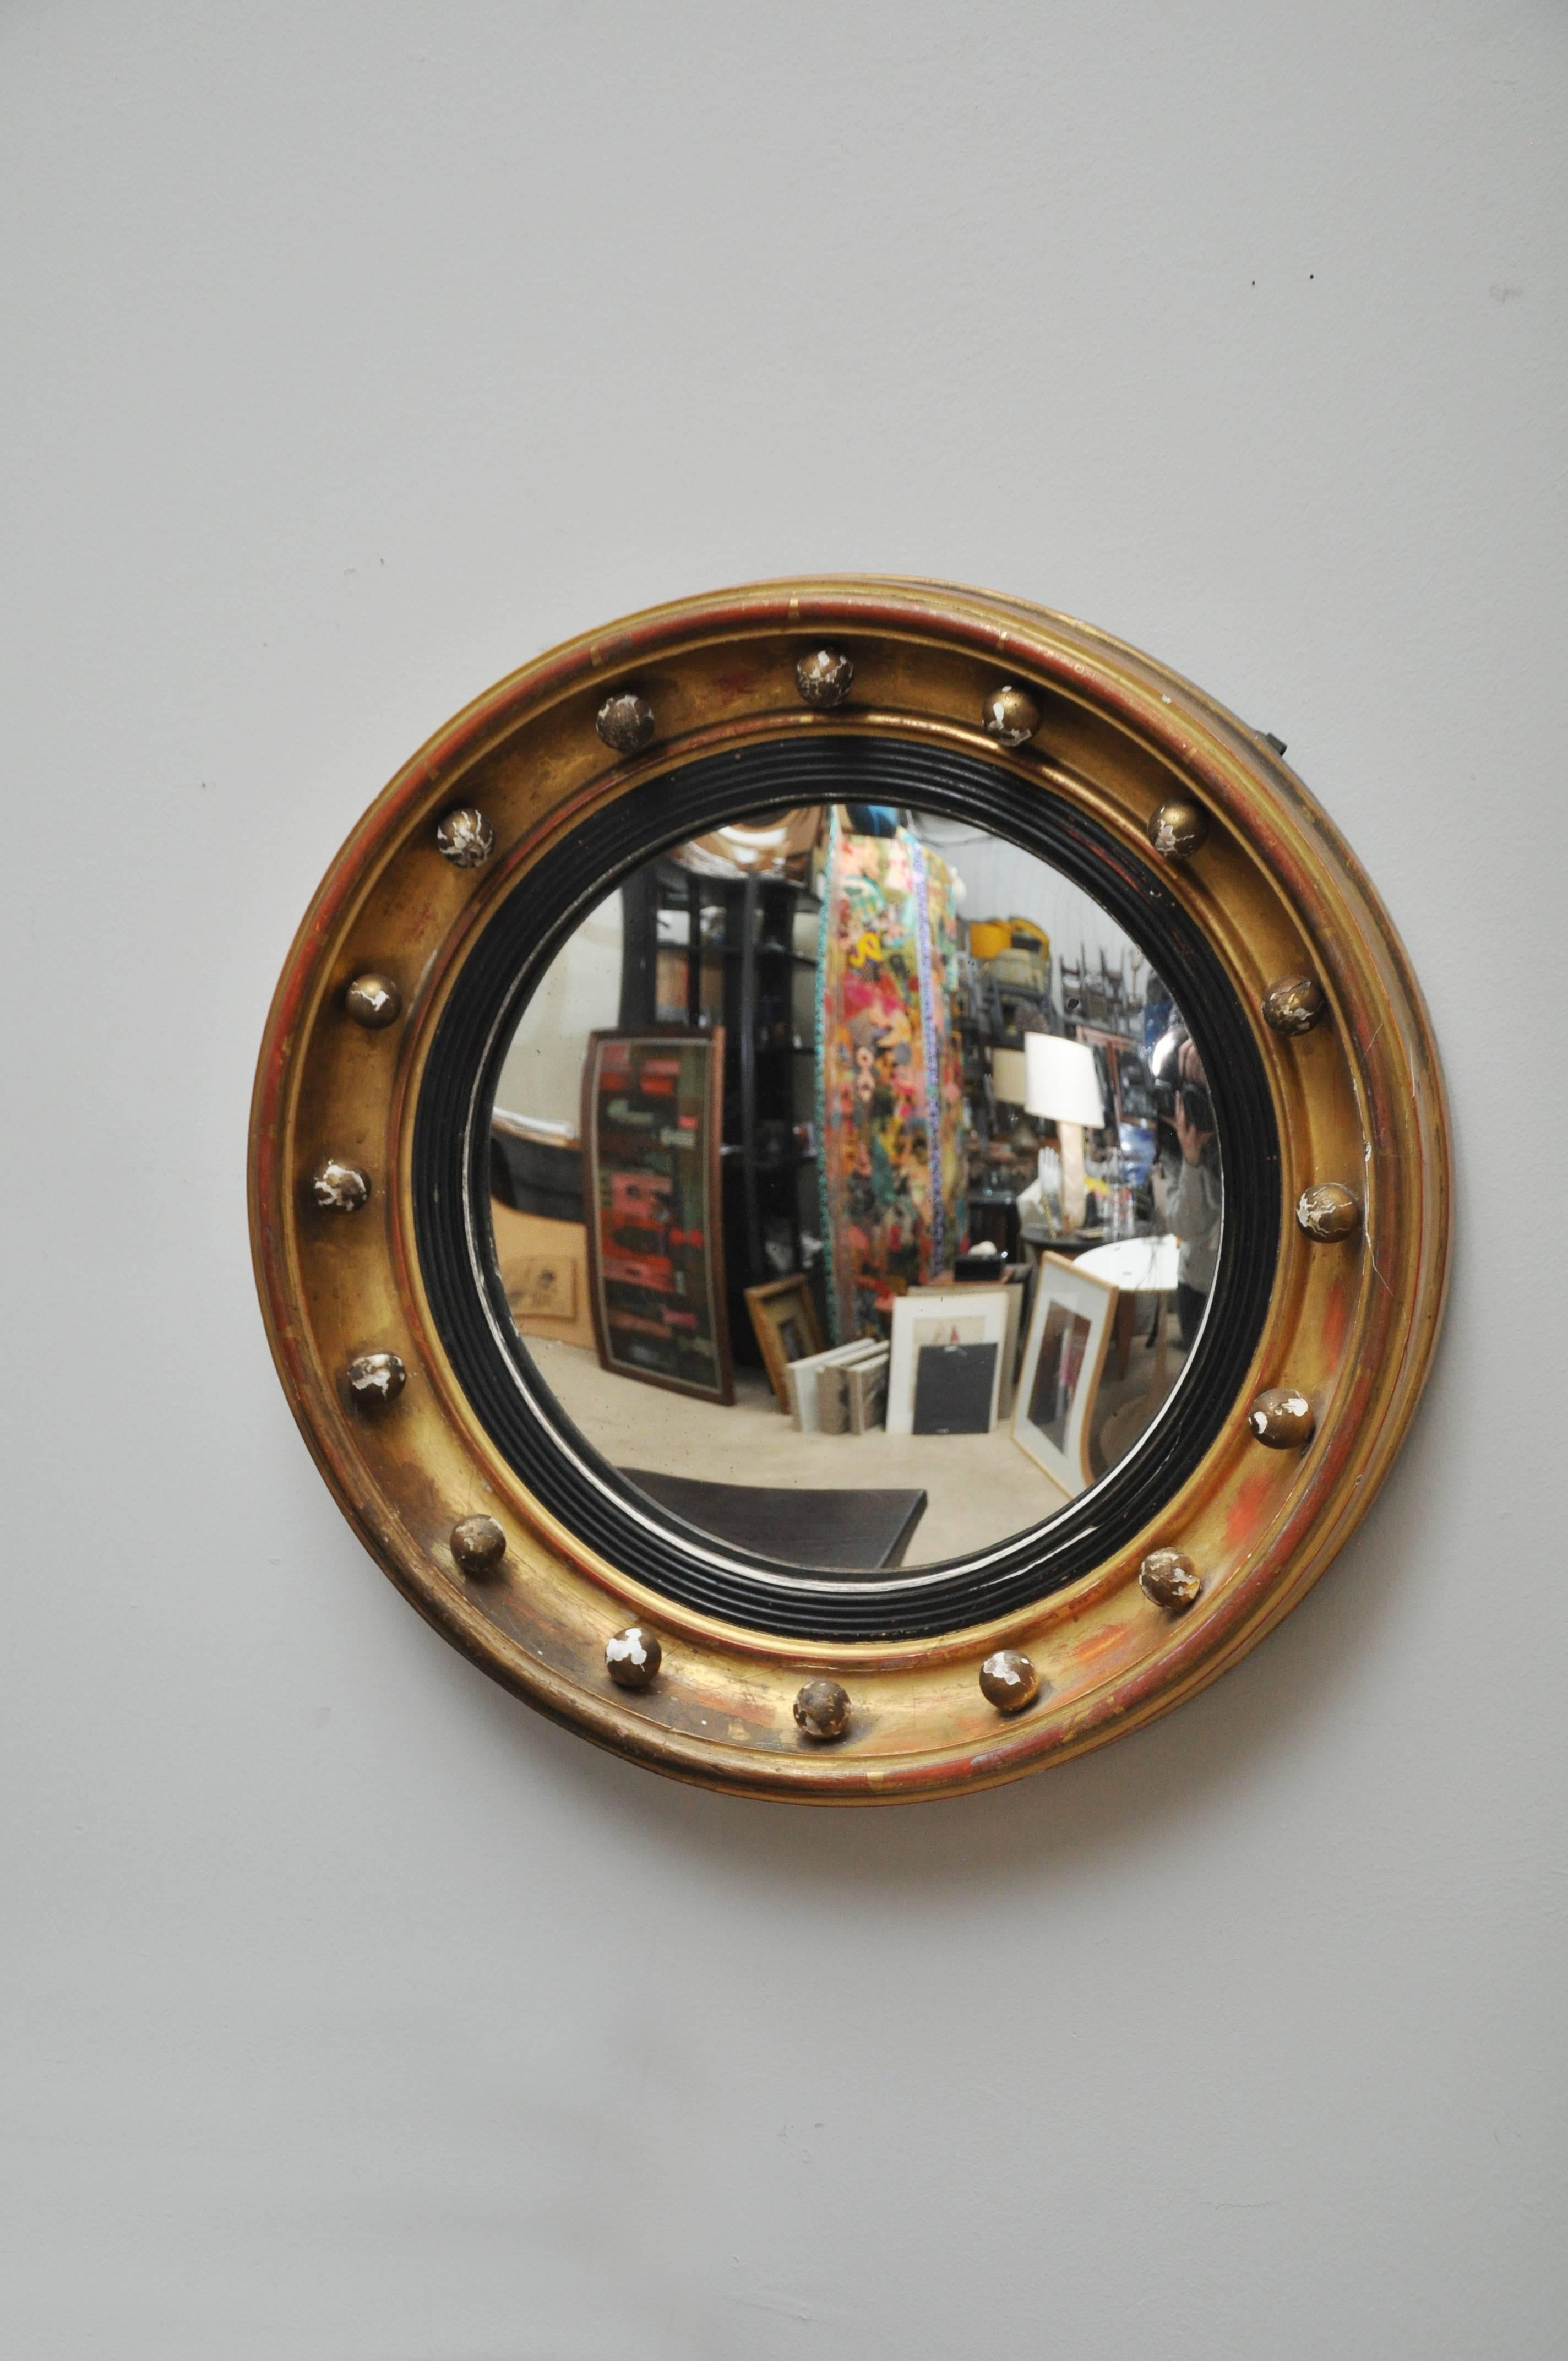 A circa 1930, Art Deco gold leaf convex bull's eye mirror from England. It is a Regency Georgian style mirror and has 16 decorative spheres around the frame along with an ebony surround and decorative geometric design. It retains the original 12